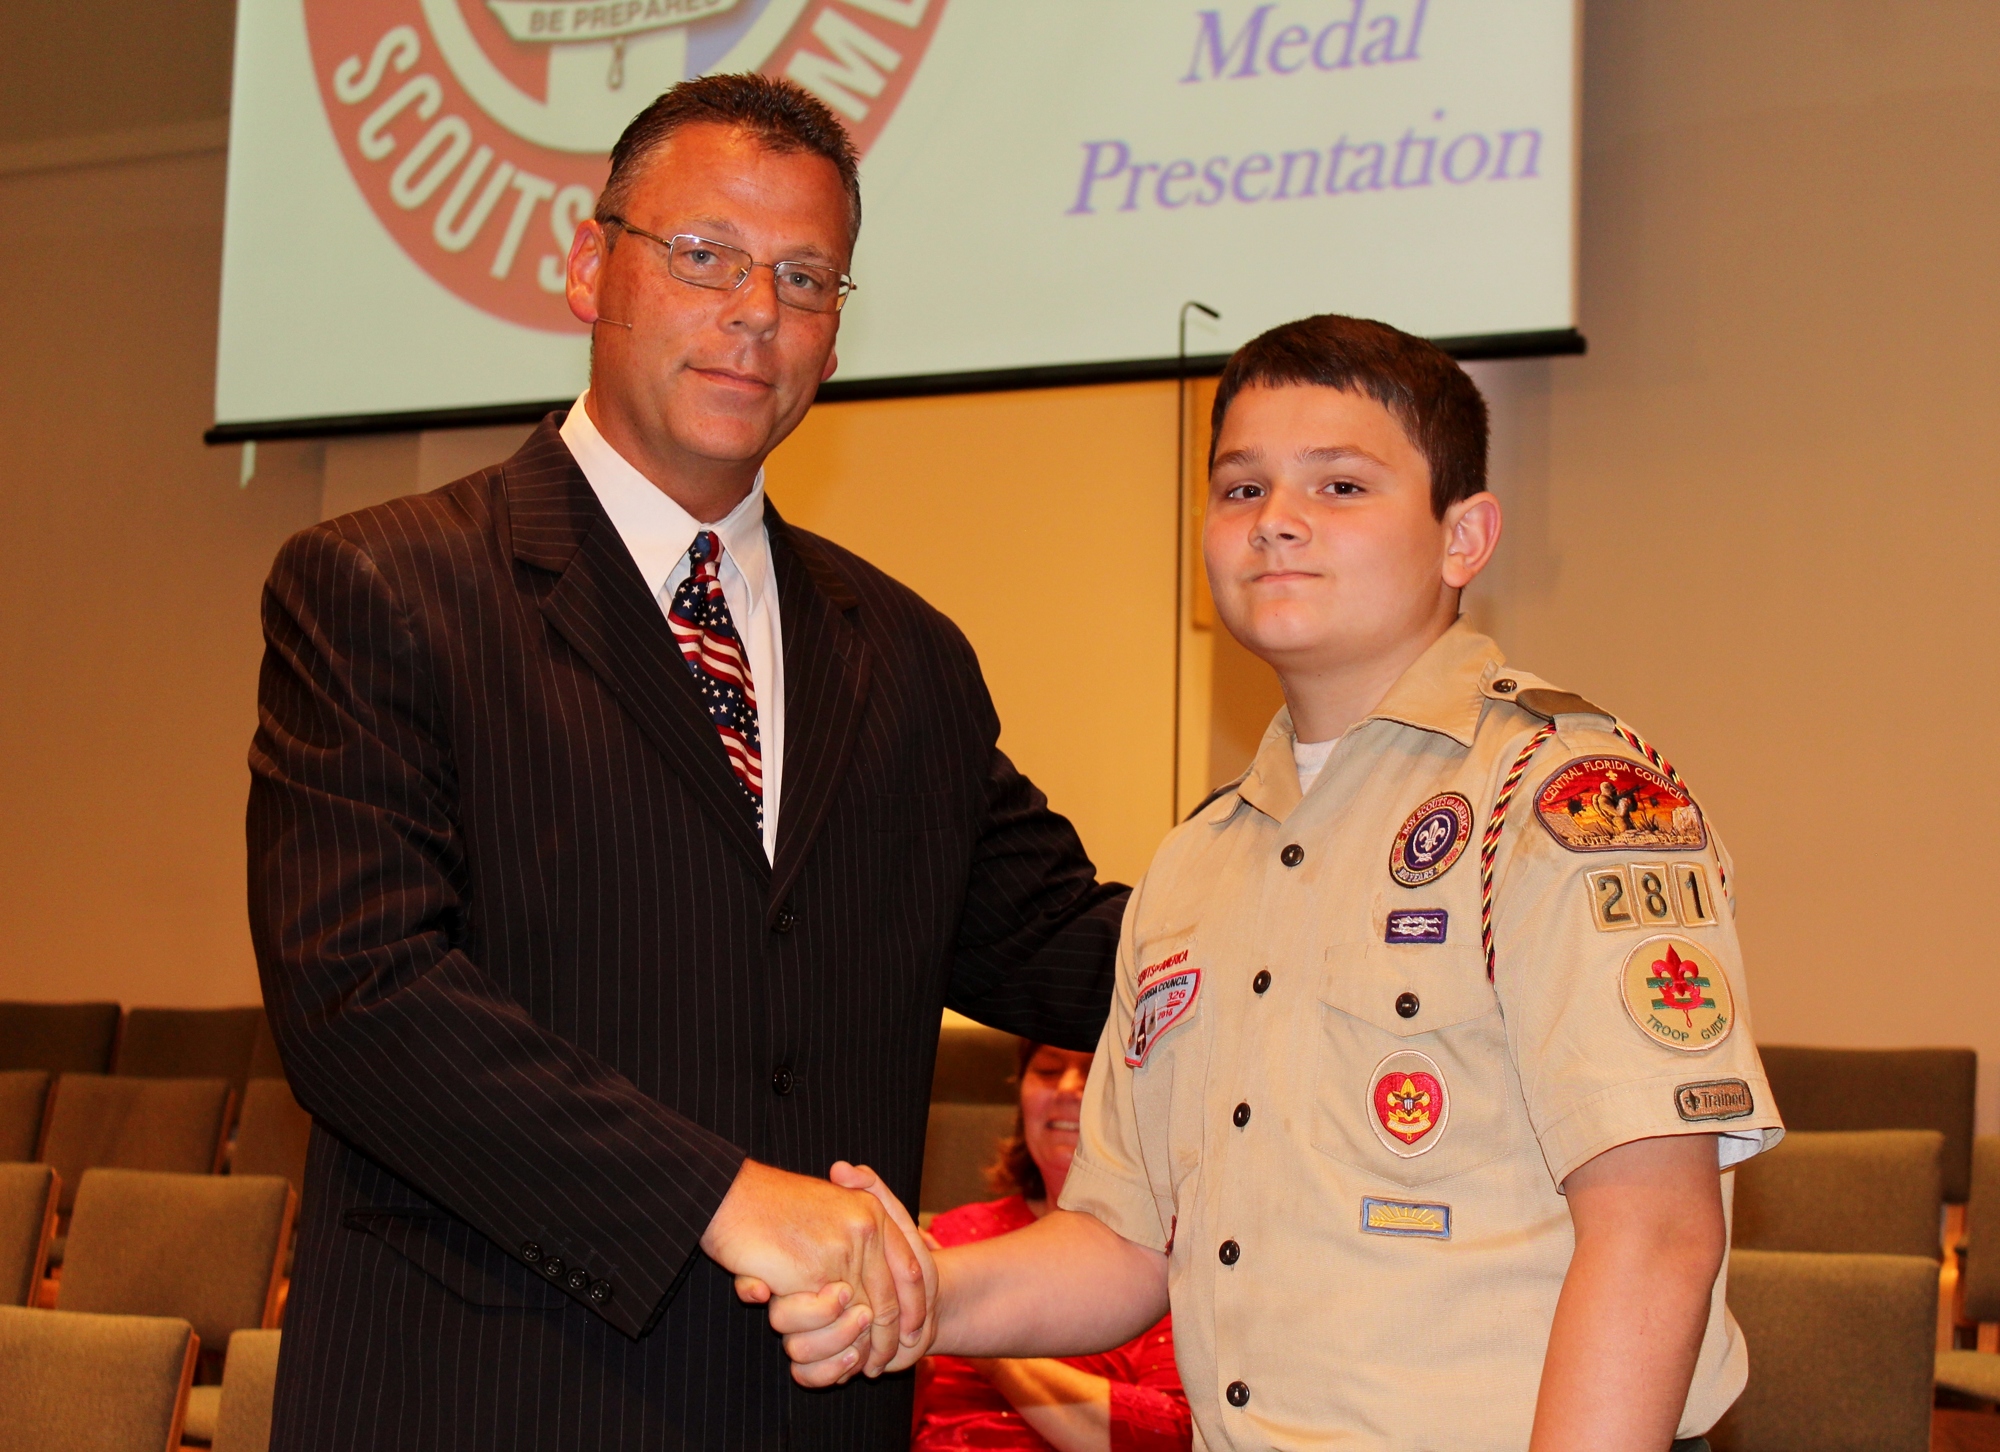 Pastor Kevin Lautar, senior pastor at First Baptist Church of Palm Coast, with Boy Scout Jacob Schichtel. Photo by Jeff Dawsey